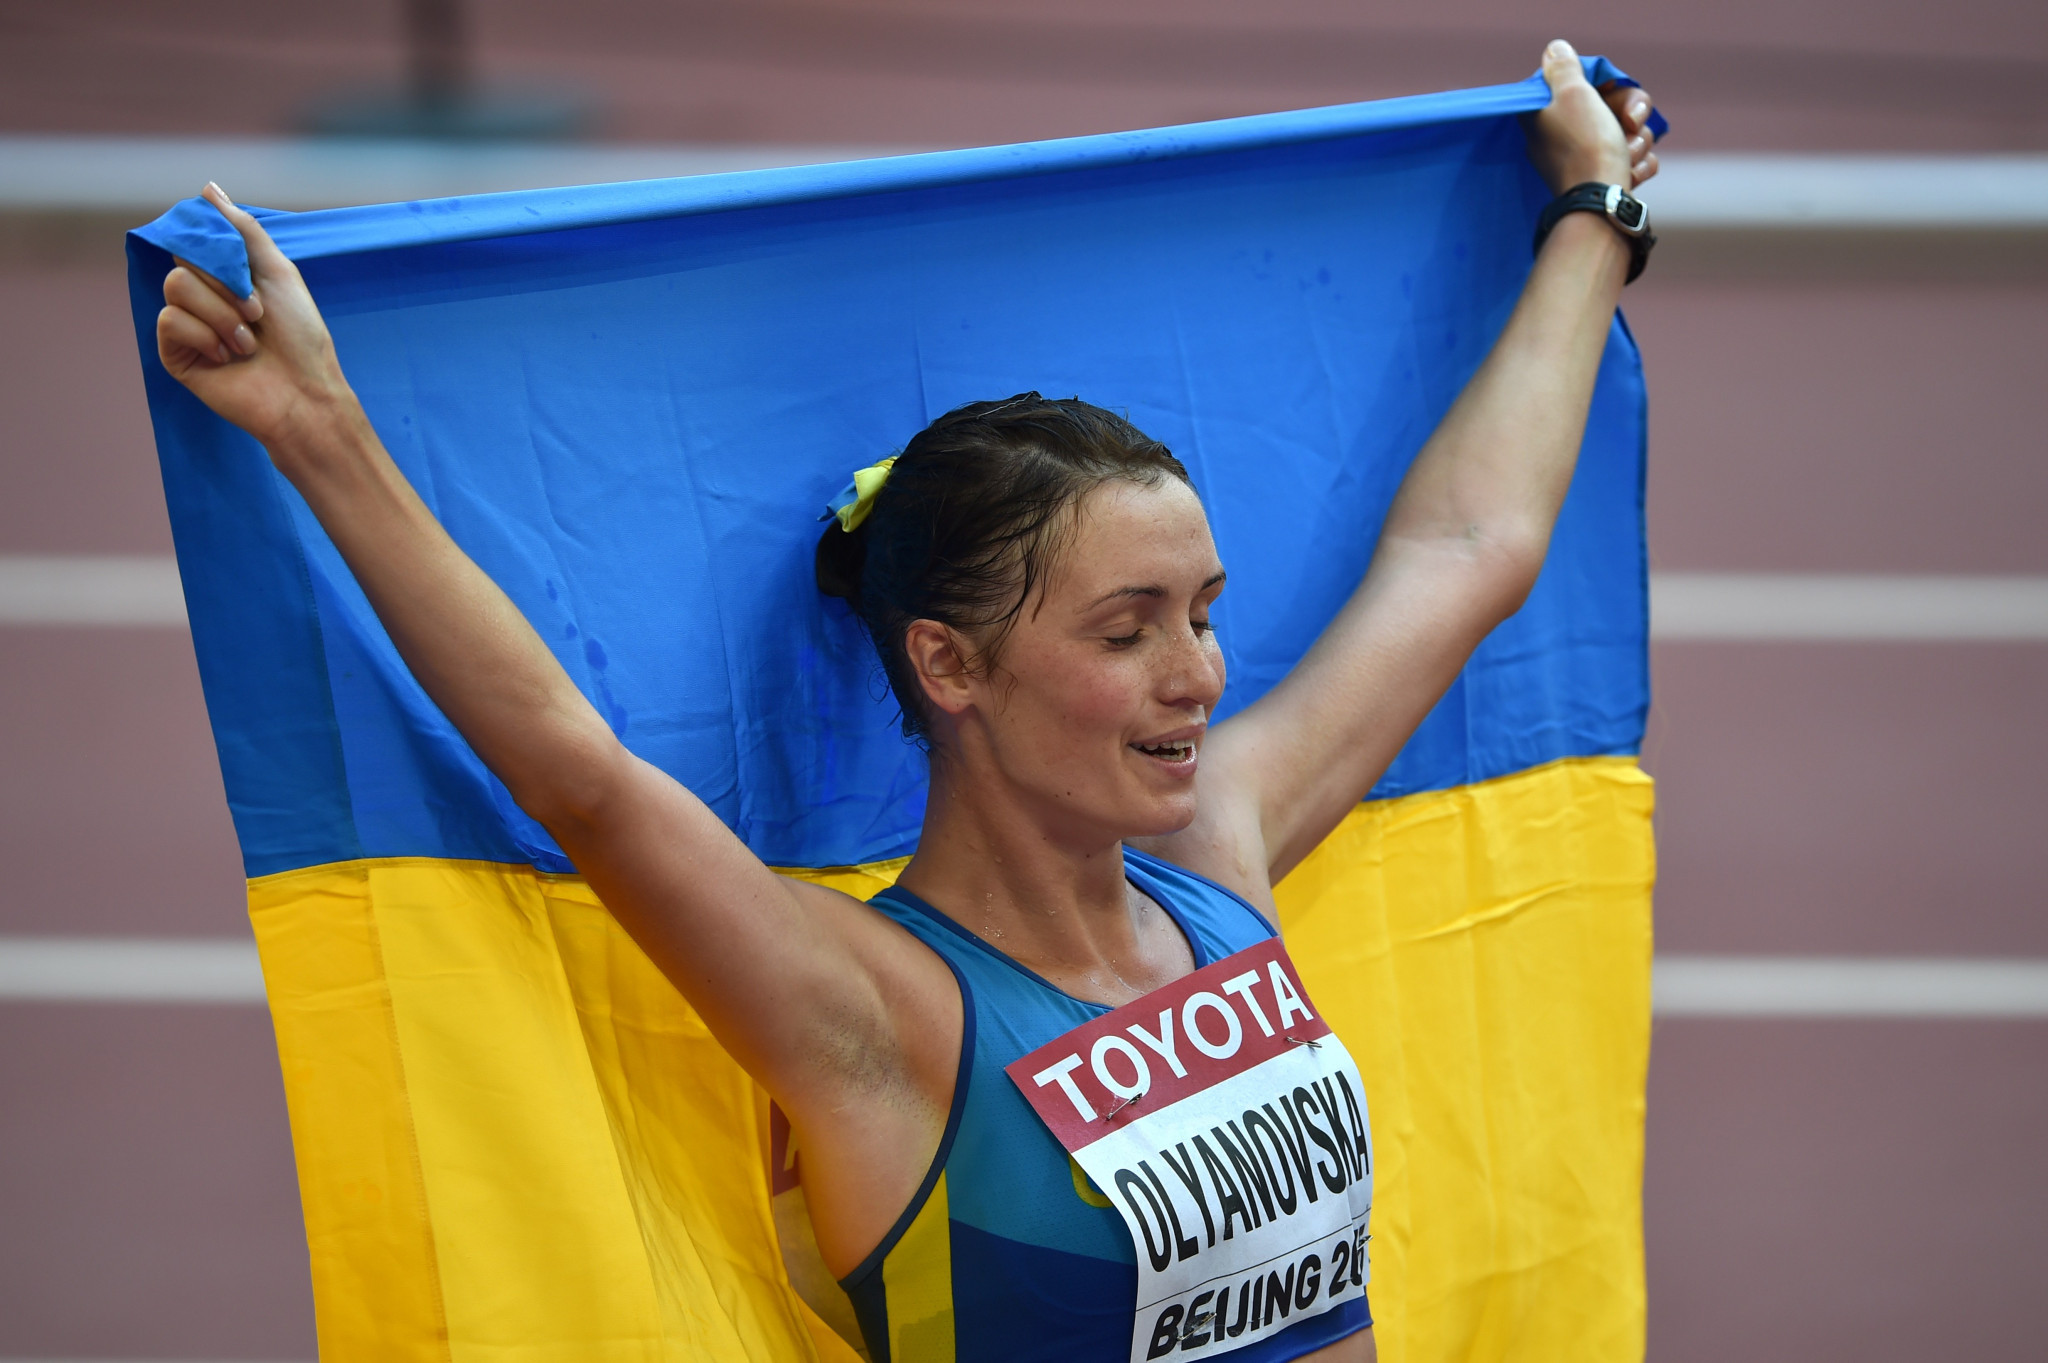 Another Ukrainian race-walker, Lyudmyla Olyanovska, is also currently banned for an anti-doping violation ©Getty Images 